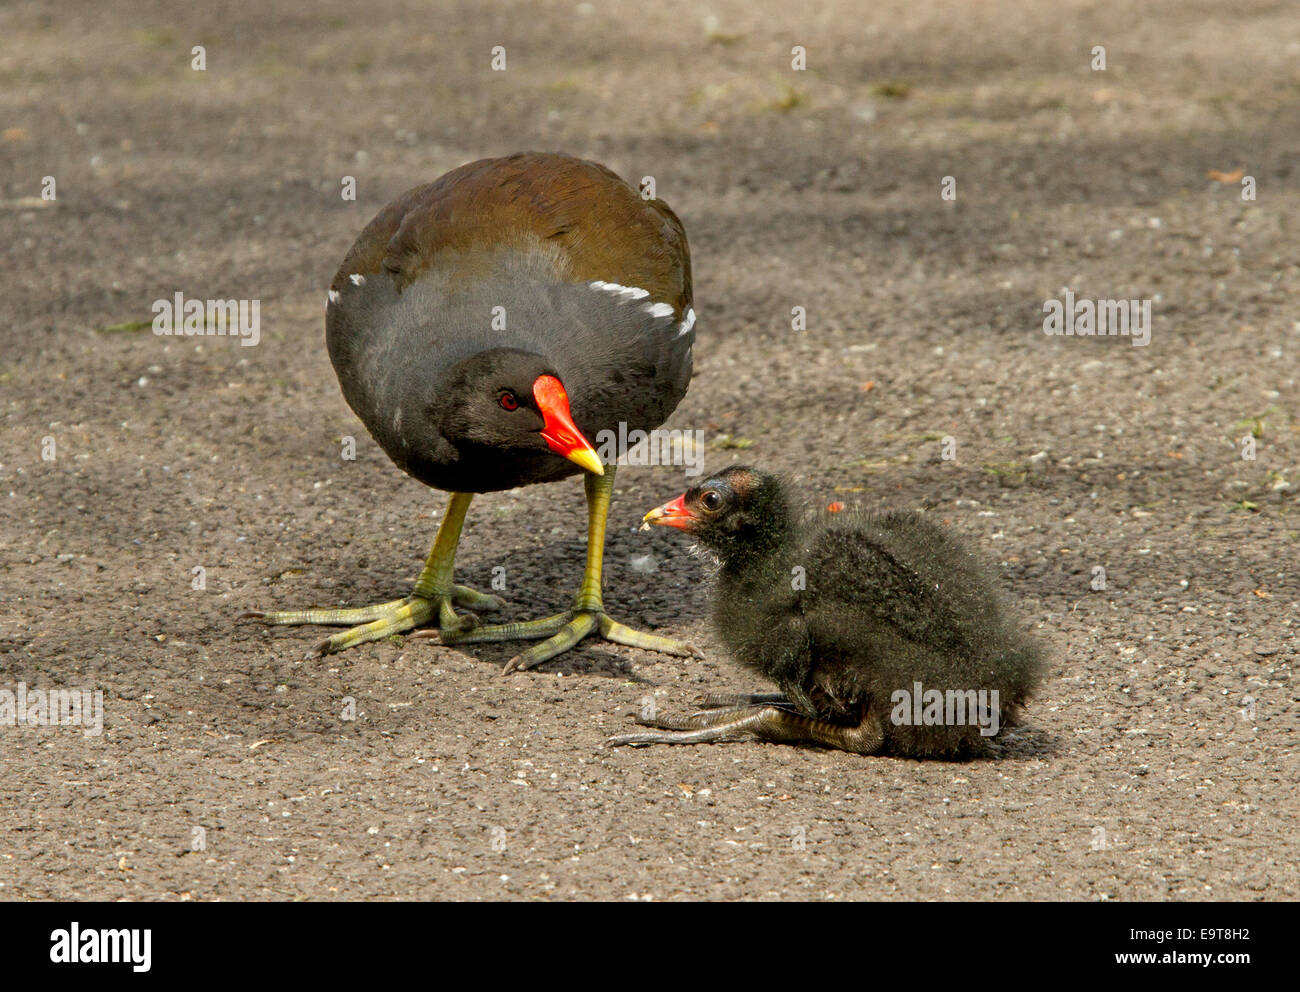 Female moorhen, Gallinula chloropus, with bright red bill offering food to fluffy chick sitting on road near wetlands Stock Photo